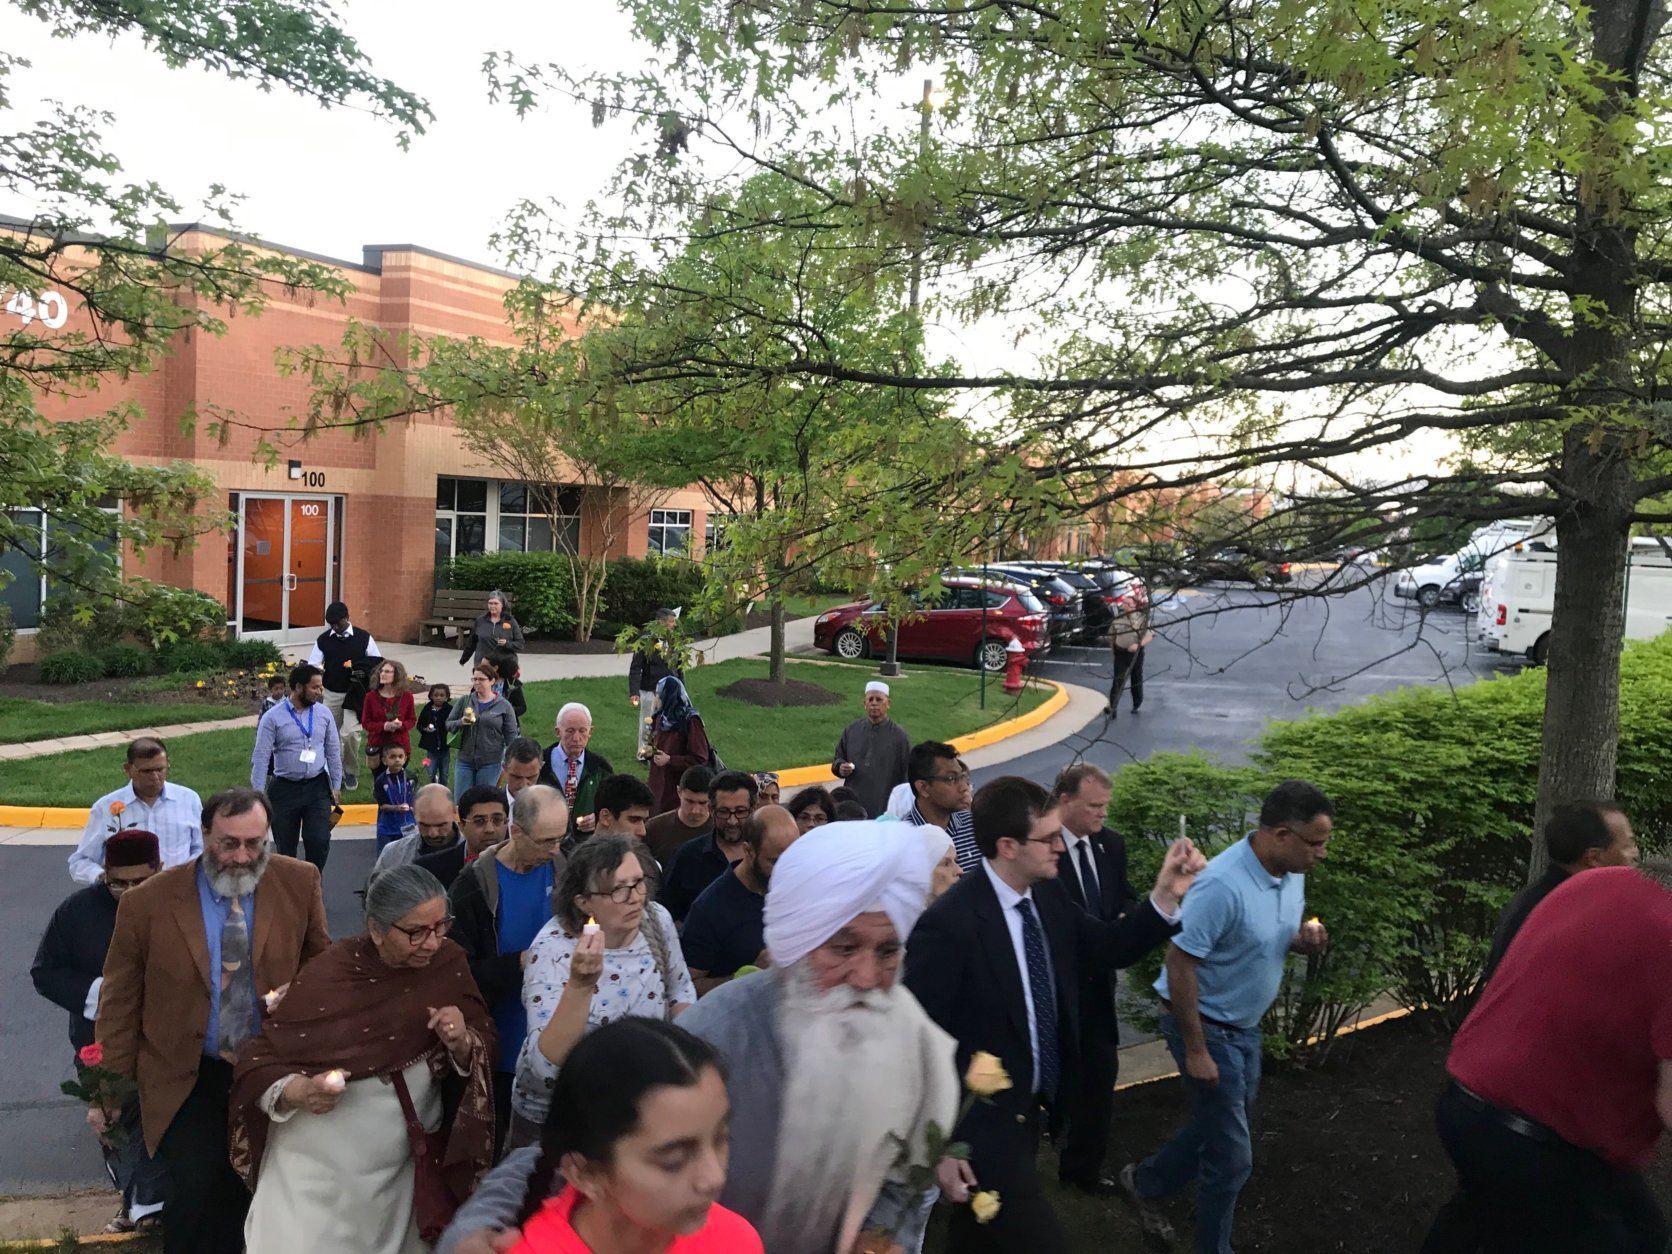 Members of Christian, Muslim, Jews, Sikh and Hindu faiths attended the gathering Monday evening. (WTOP/Dick Uliano)